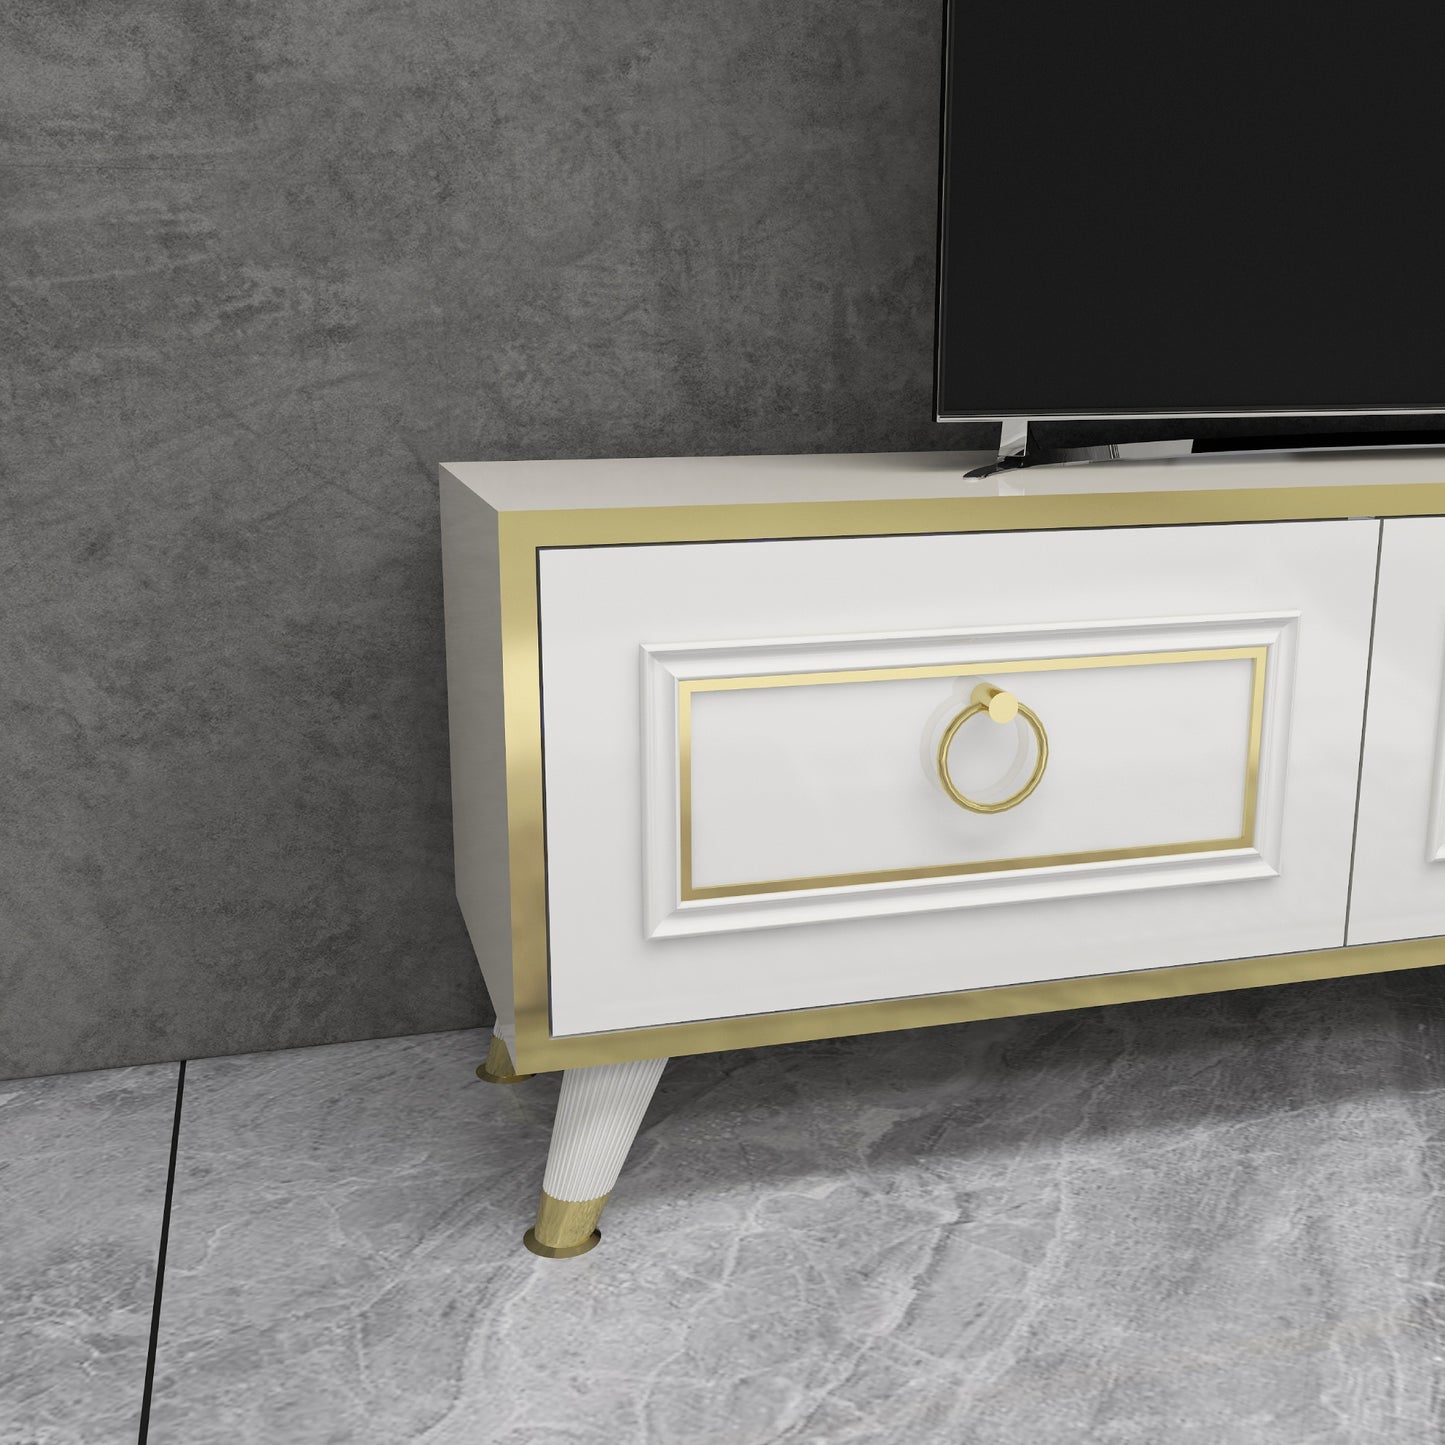 Romens 150 cm Wide TV Stand and Media Console with Cabinets